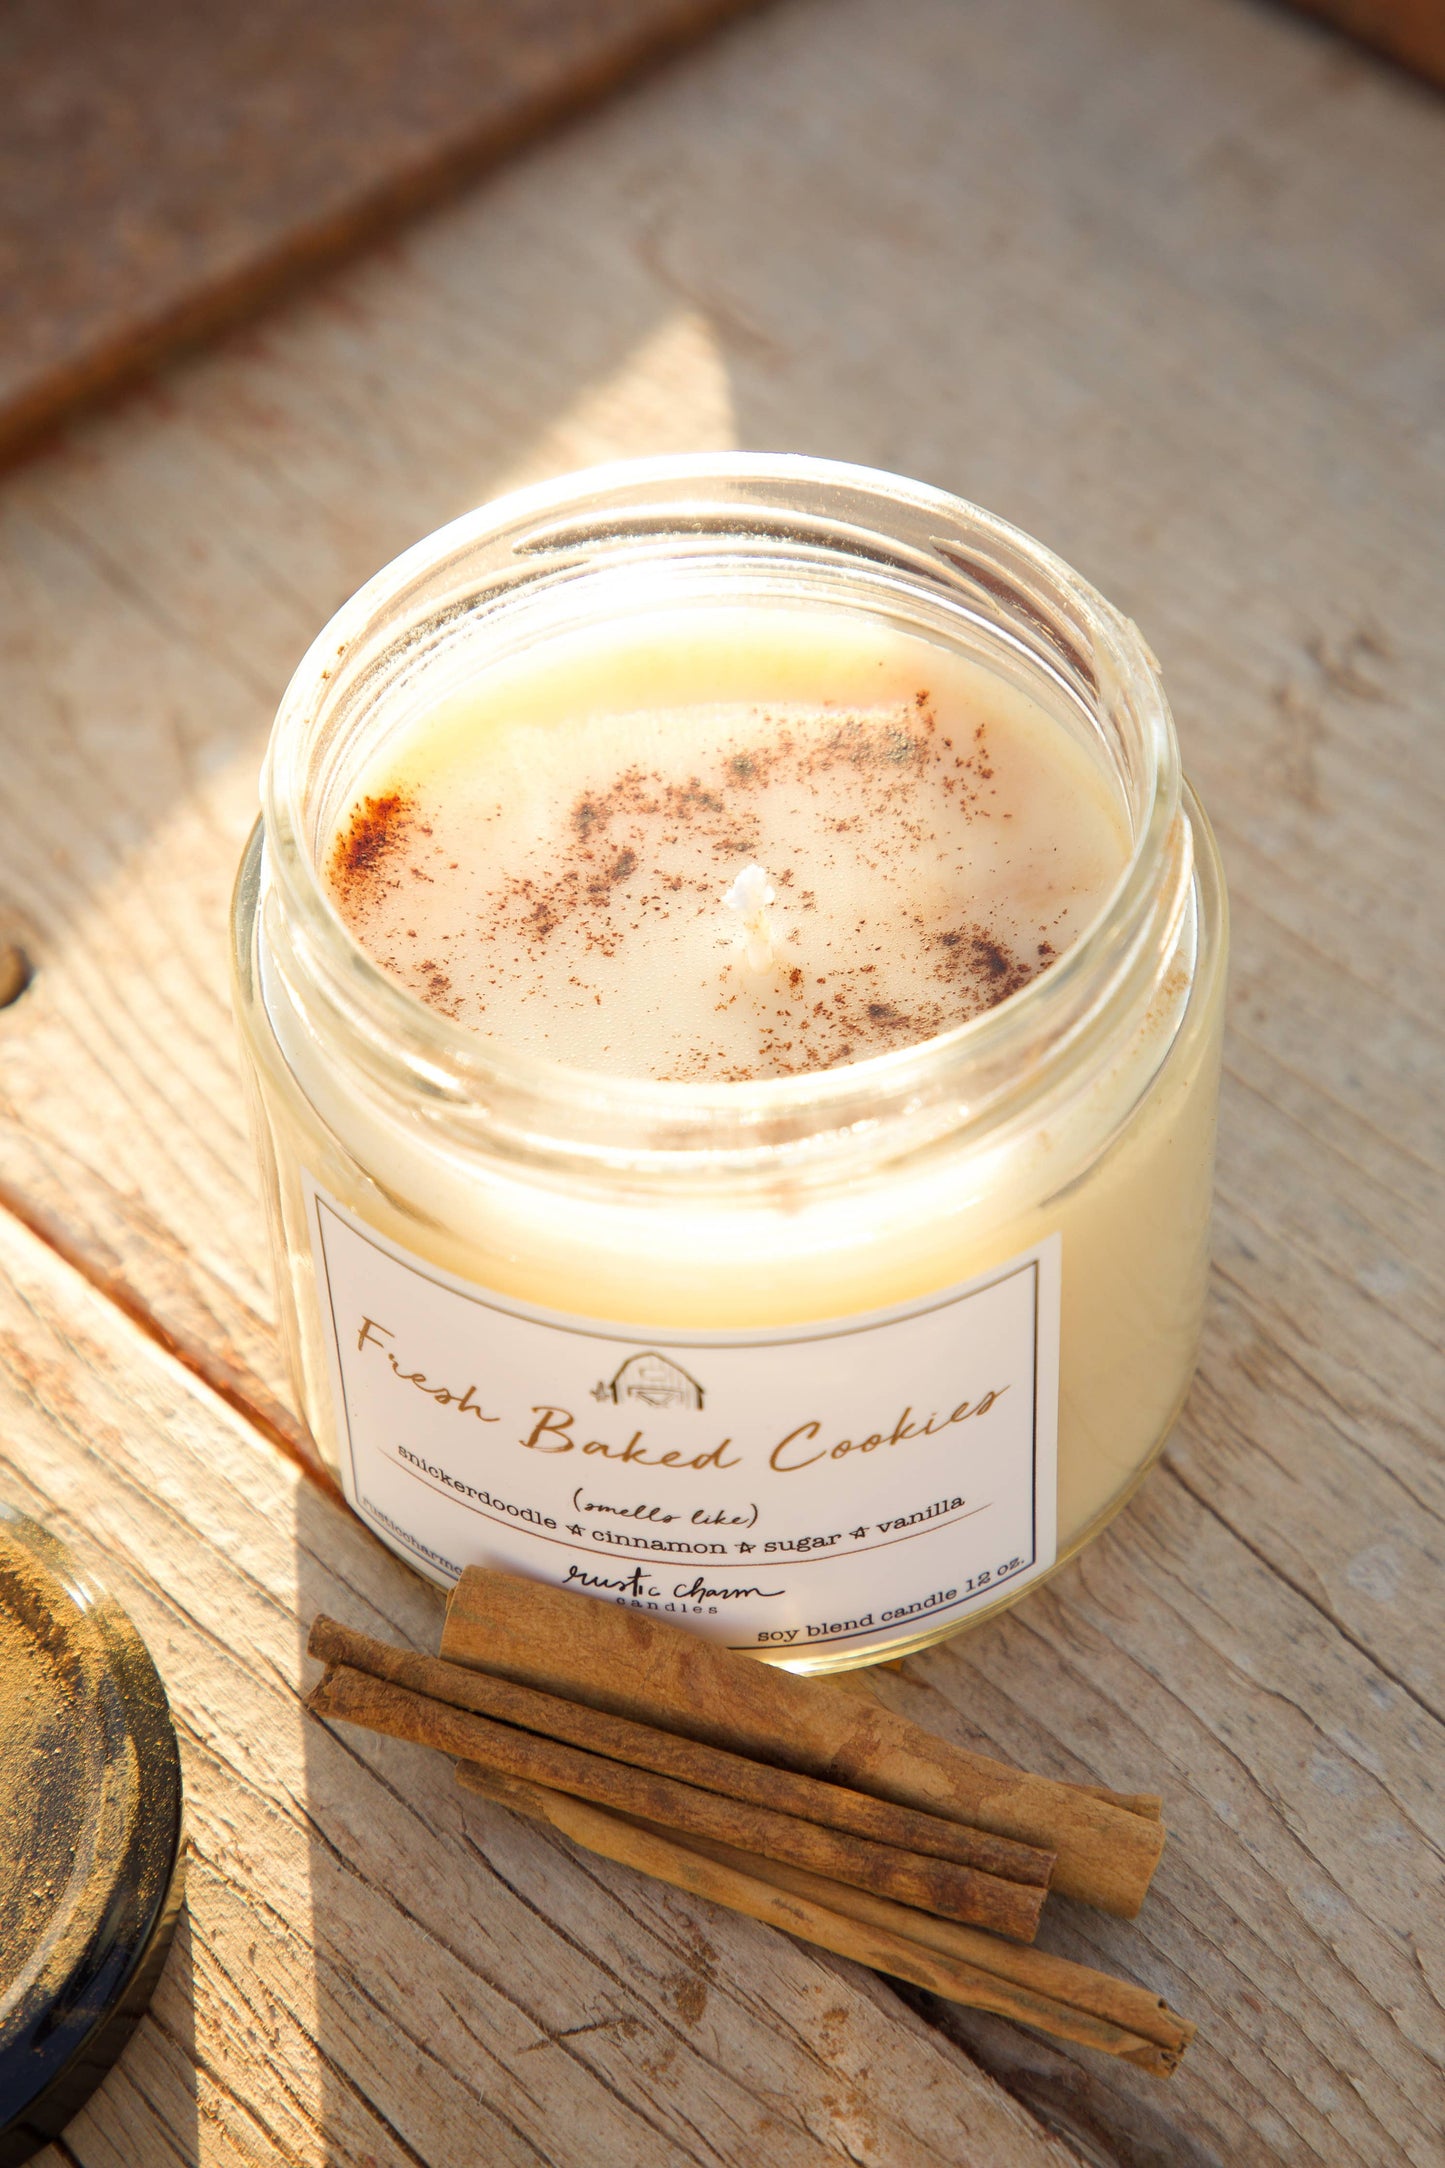 Fresh Baked Cookies Candle